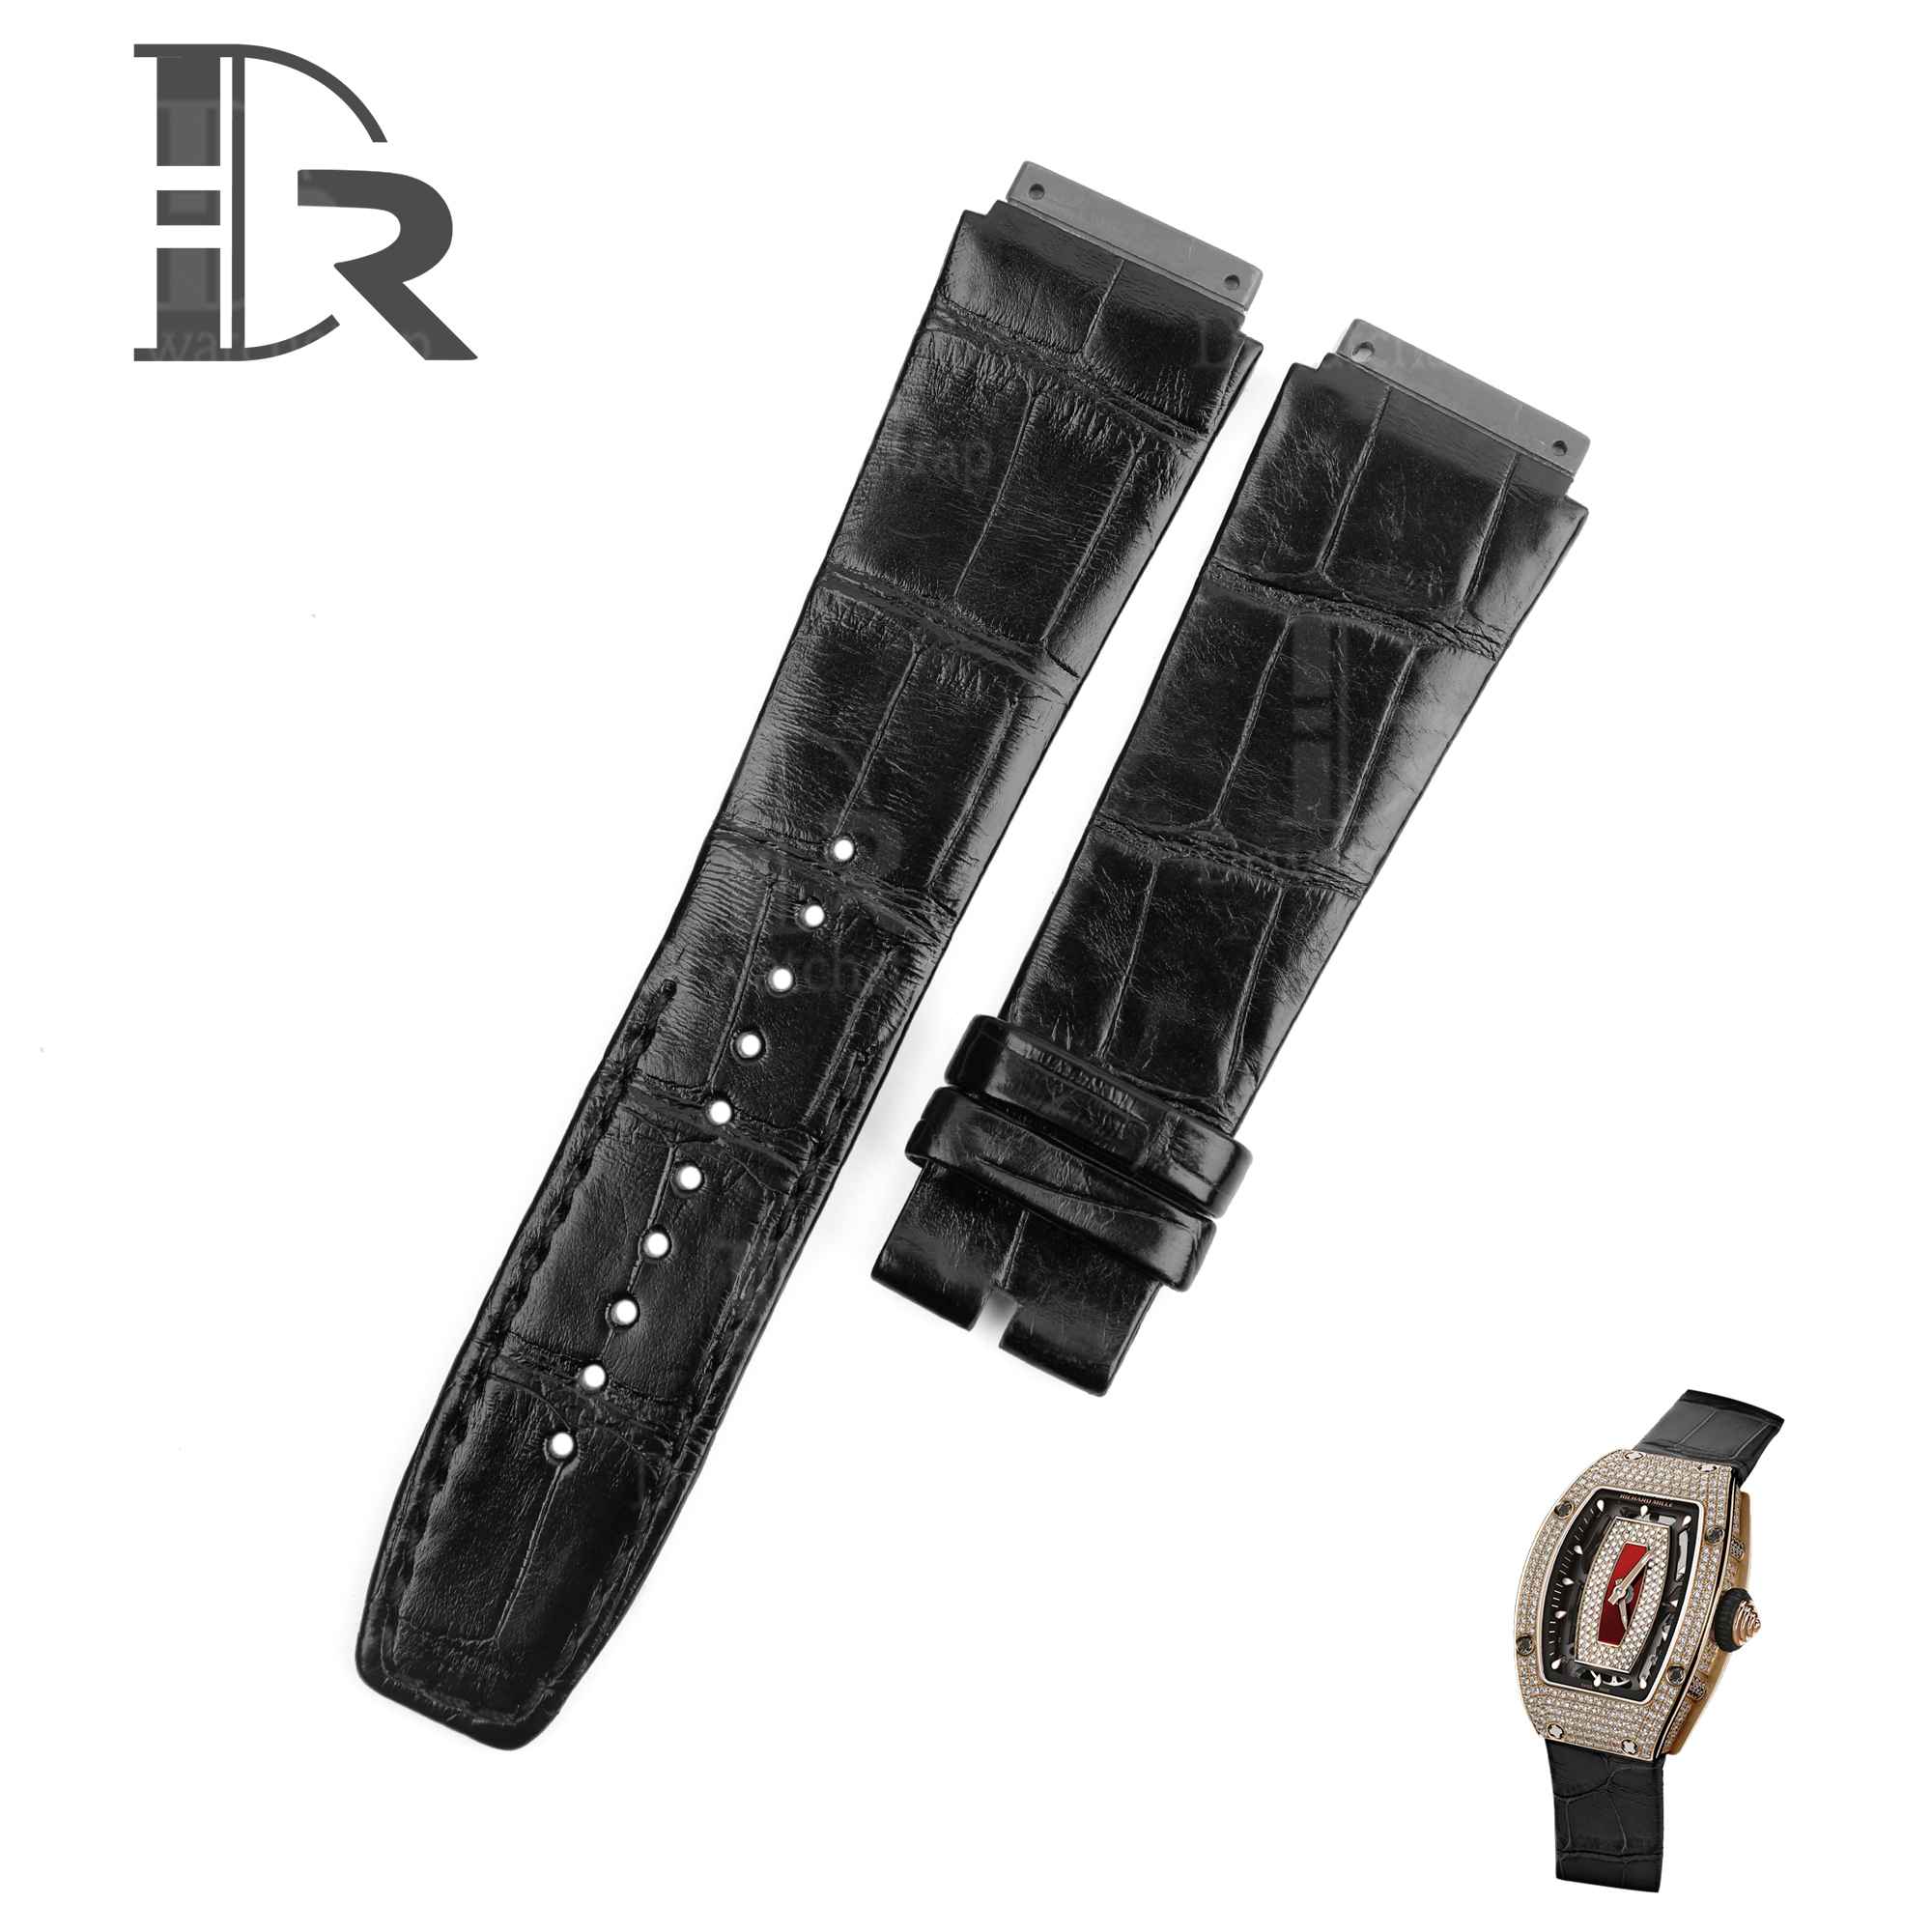 Best quality genuine custom black Richard Mille RM leather strap replacement and watch band for RM 005 007 010 011 016 030 035 055 067 67-02 and more for sale - Shop OEM aftermarket watch bands at a discount price